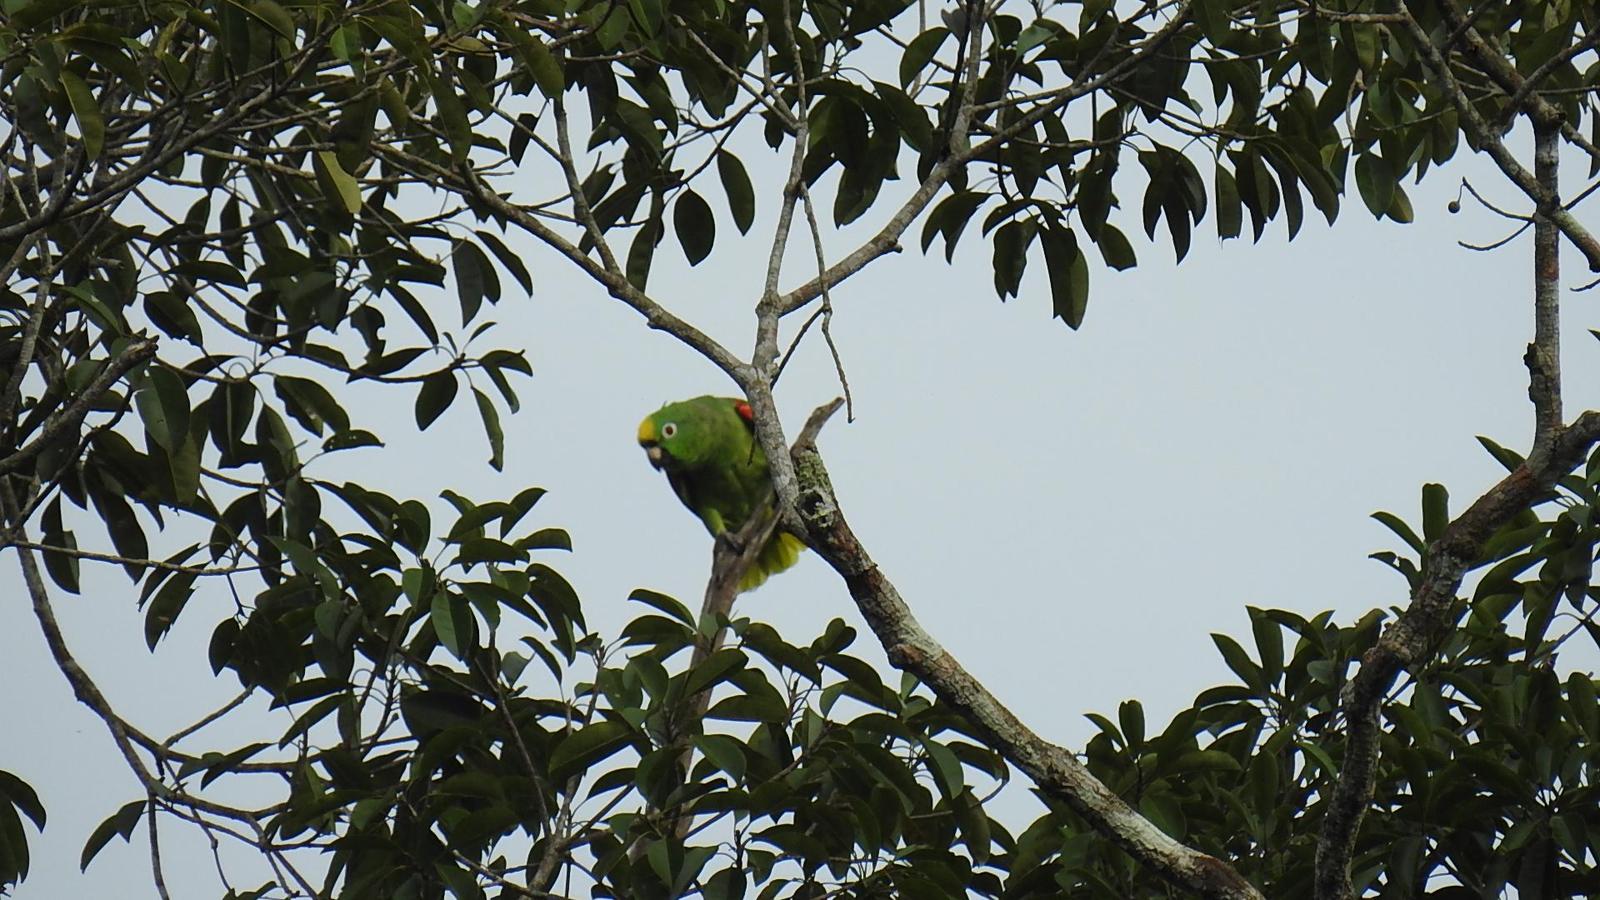 Yellow-crowned Parrot Photo by Julio Delgado